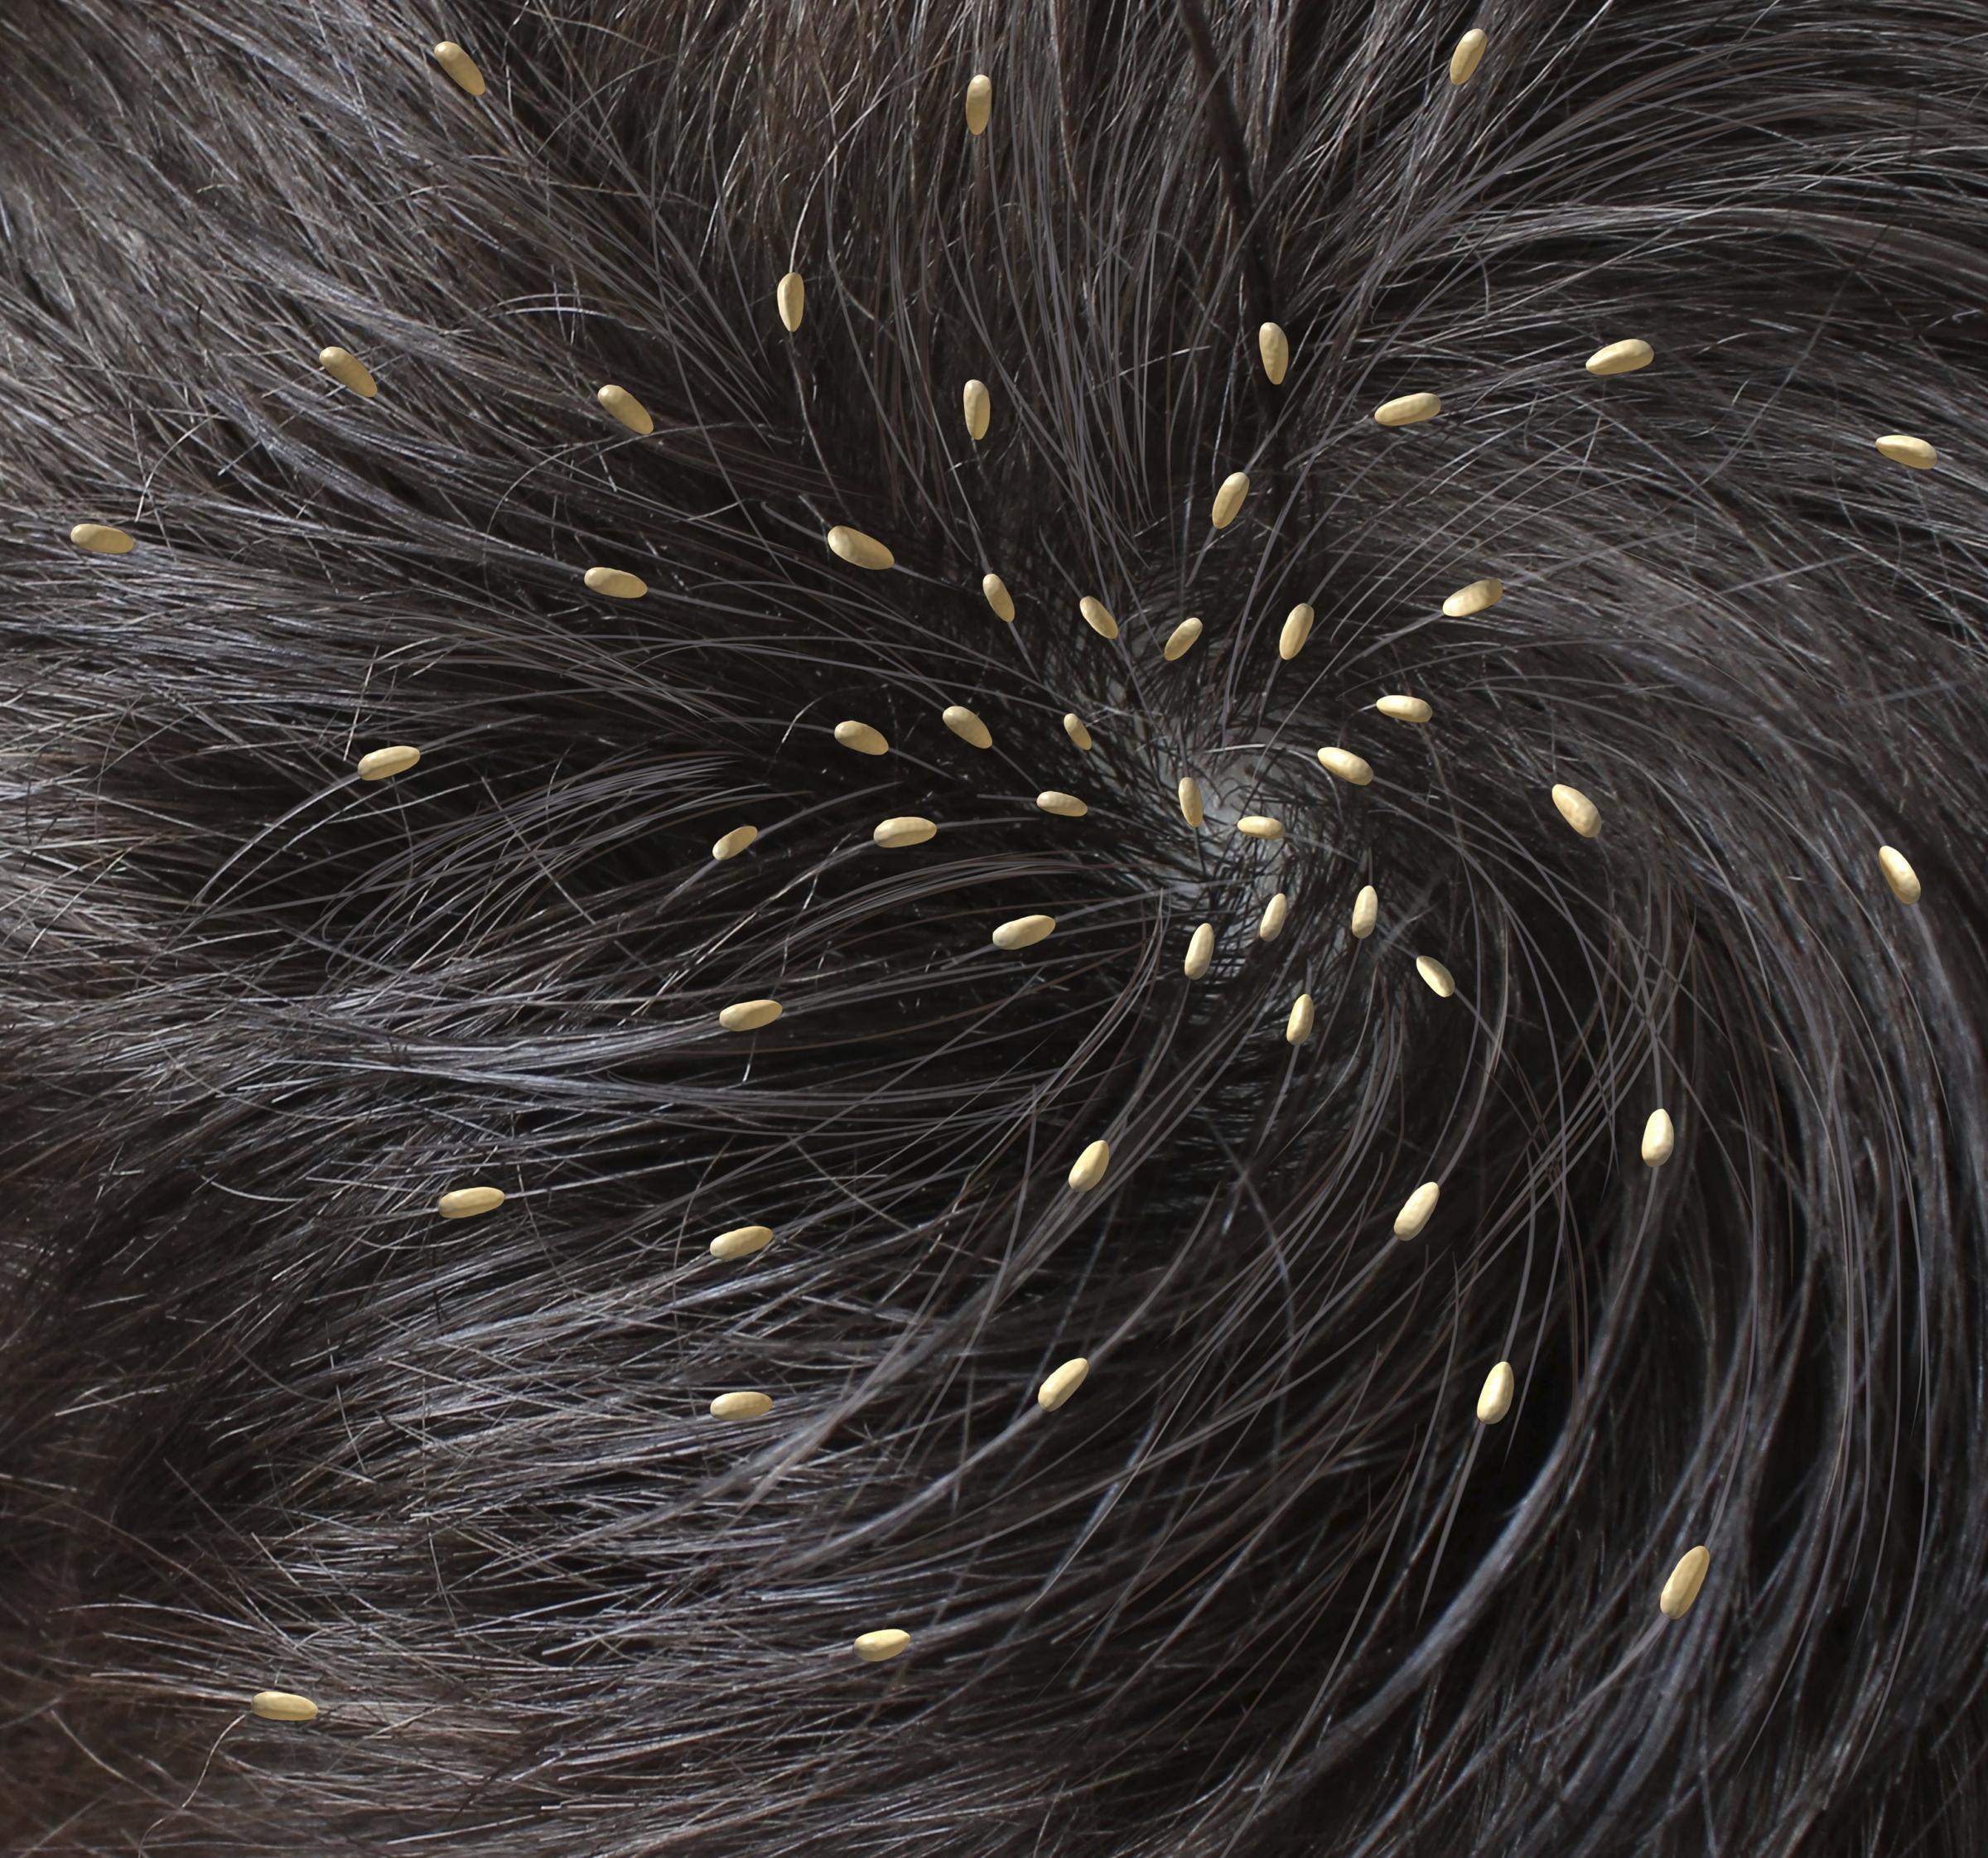 Where can you view photos of head lice?